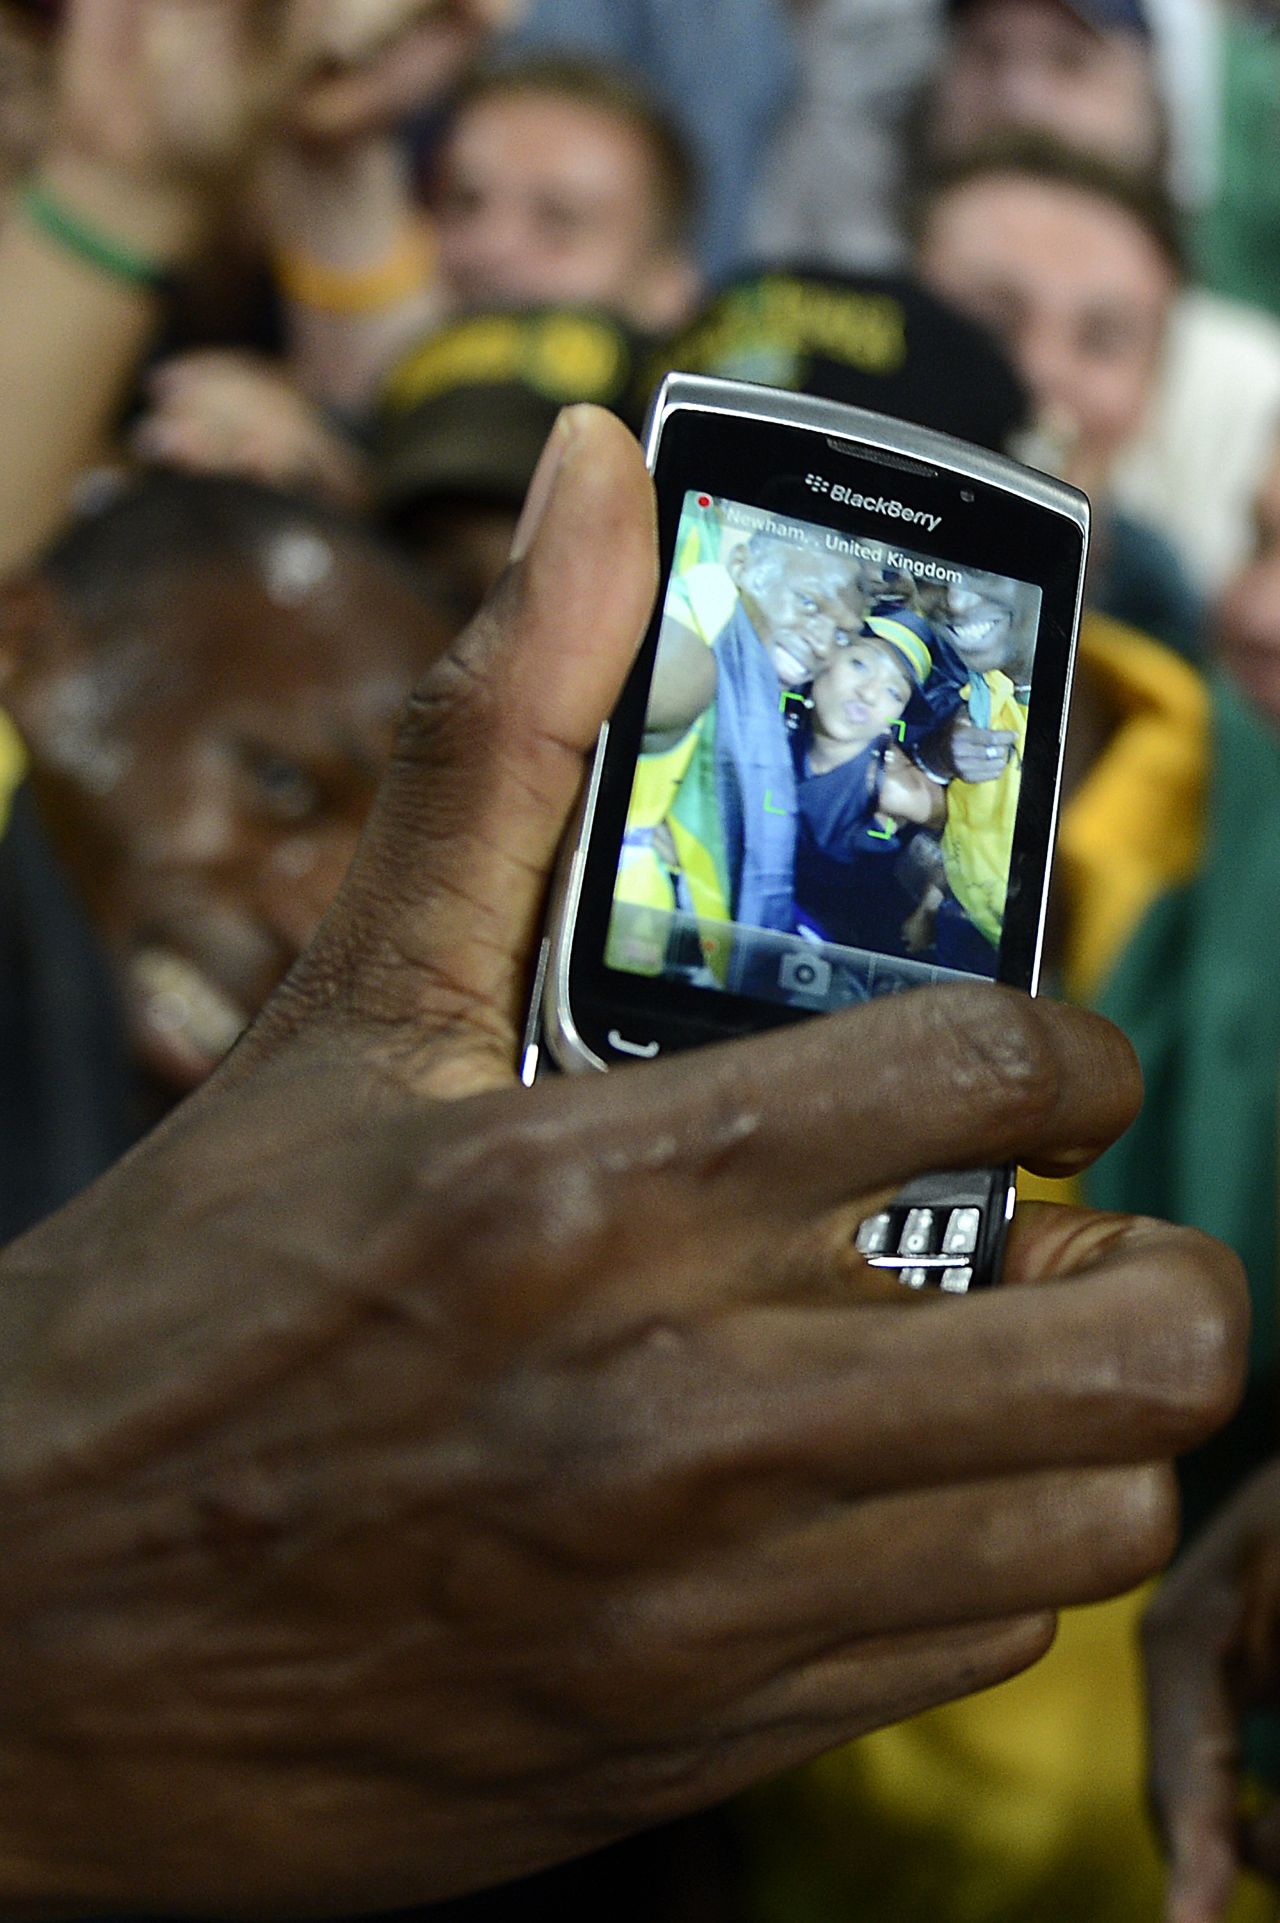 Sochi will be following in the footsteps of the London 2012 Olympics, which was heralded as the "first social media Games." Here sprint star Usain Bolt is seen captured on a spectator's smartphone.